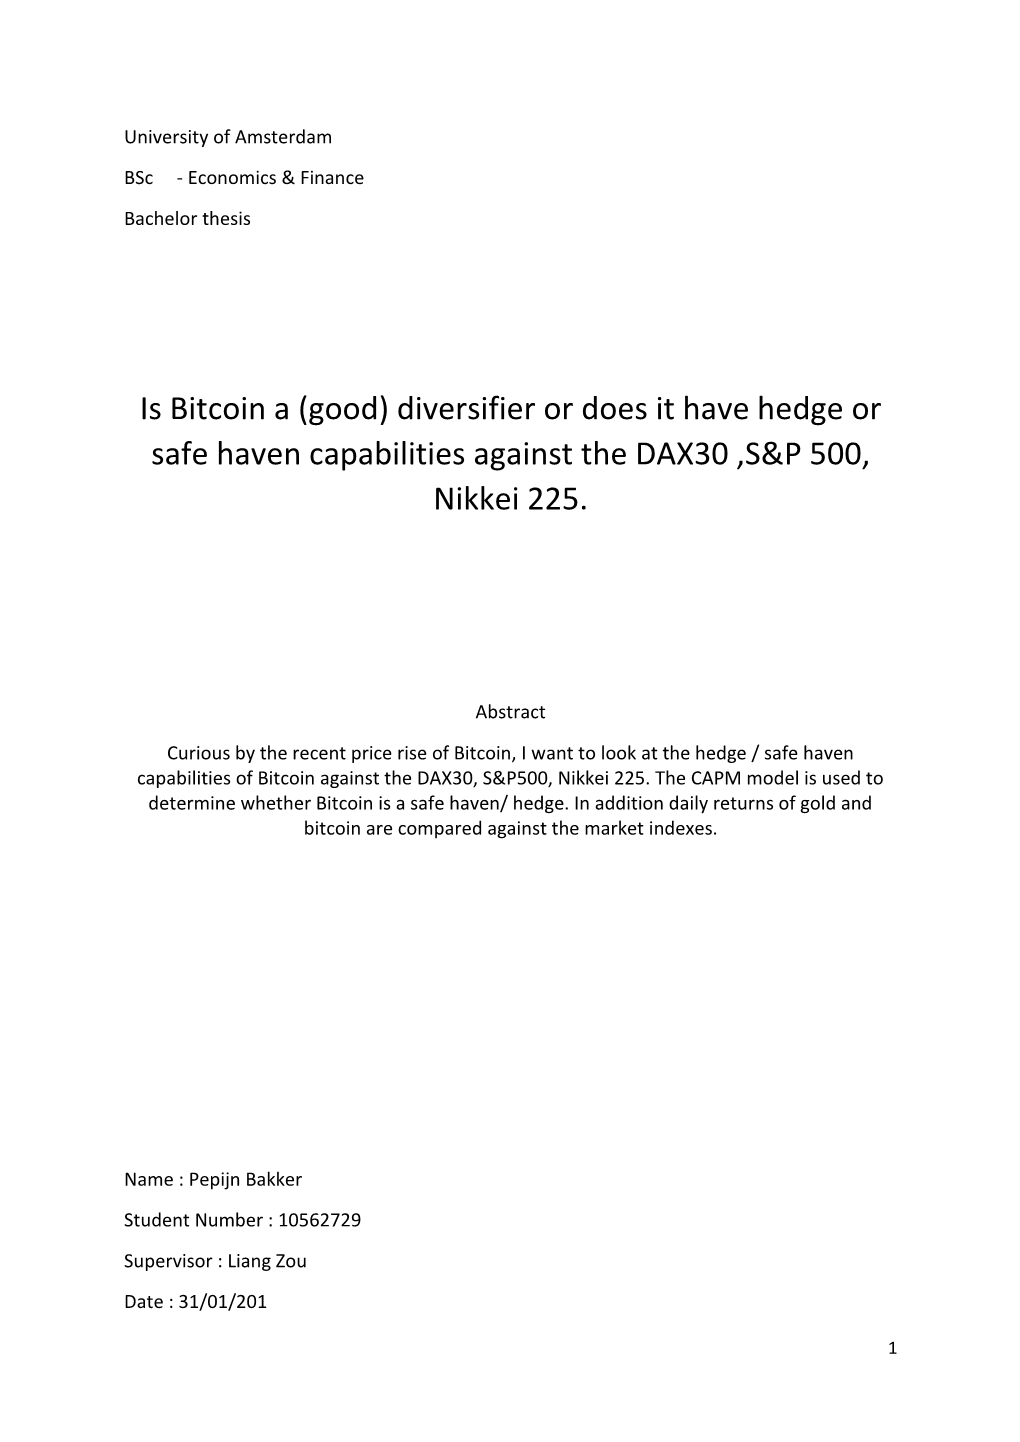 Is Bitcoin a (Good) Diversifier Or Does It Have Hedge Or Safe Haven Capabilities Against the DAX30 ,S&P 500, Nikkei 225